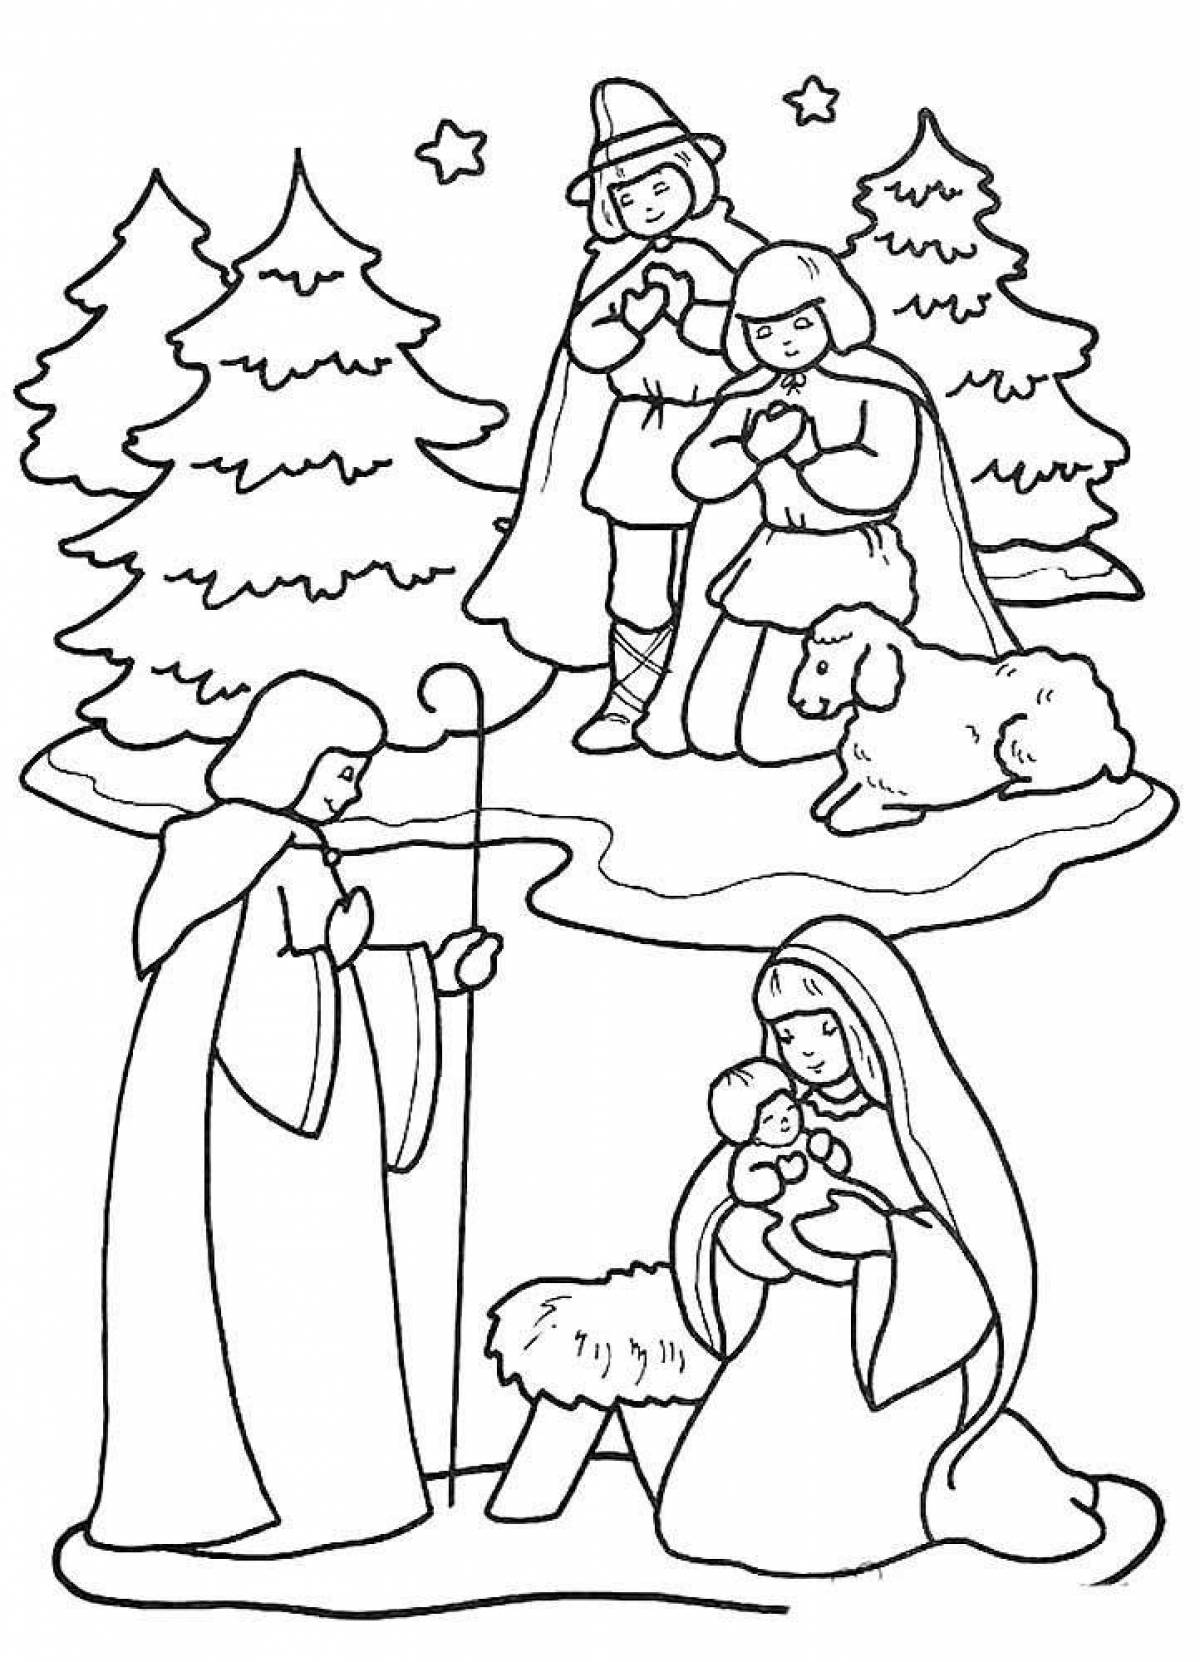 Generous Christmas coloring book for kids